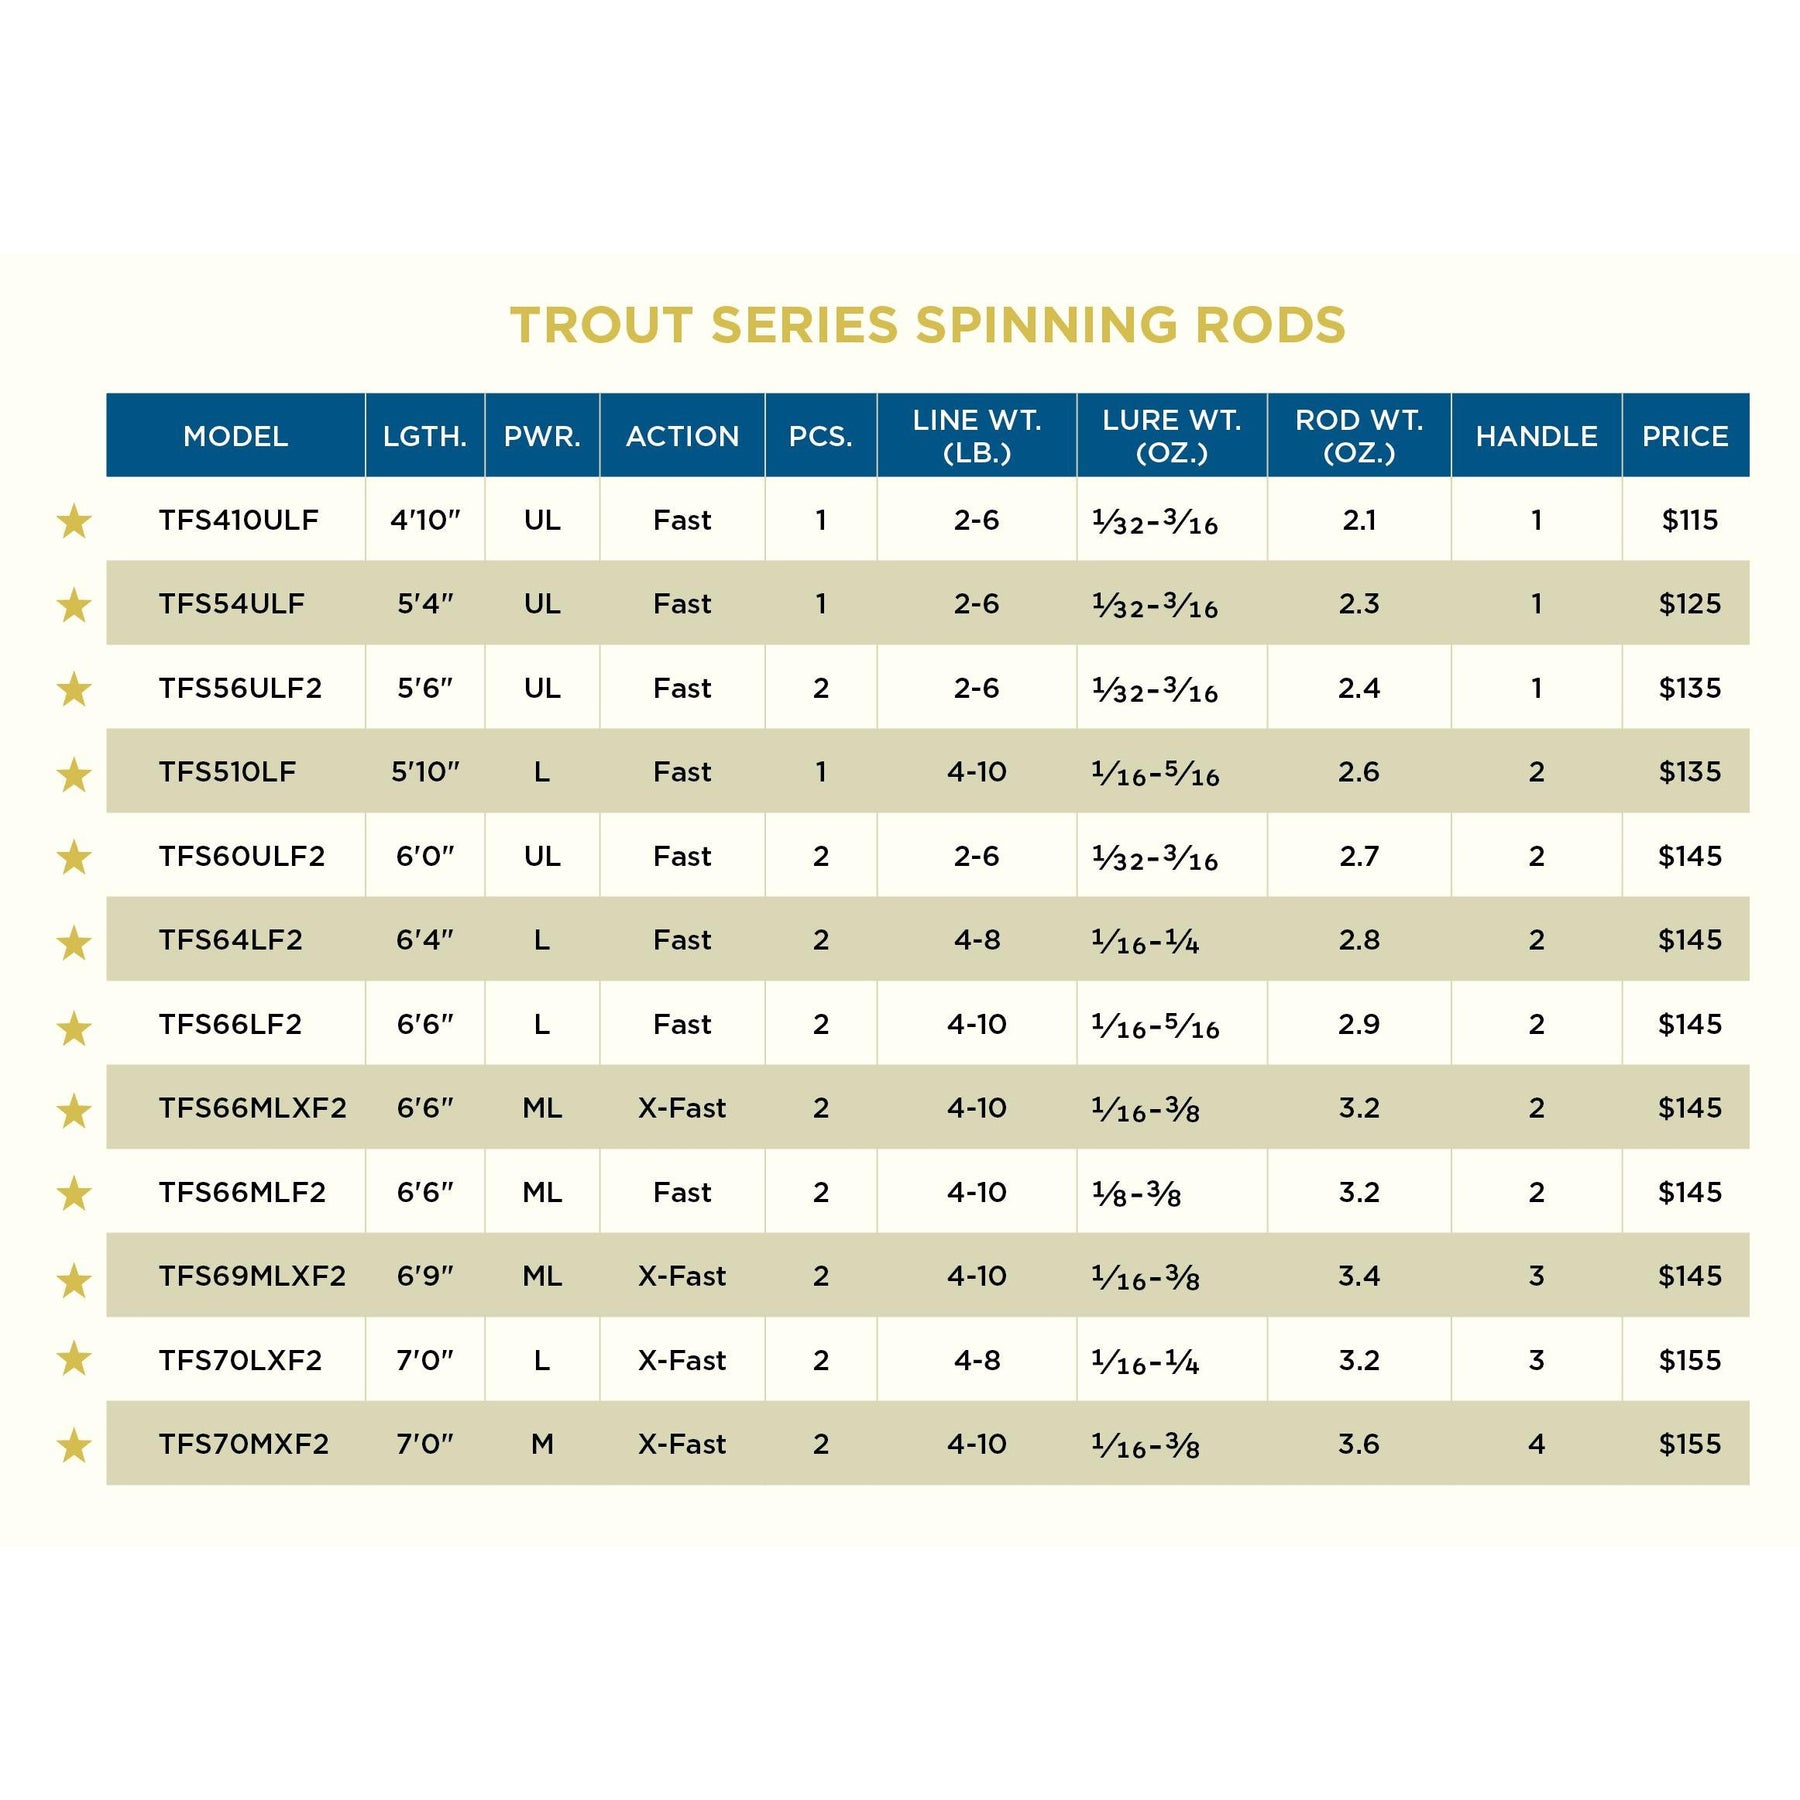 St. Croix Trout Series Spinning Rod Models